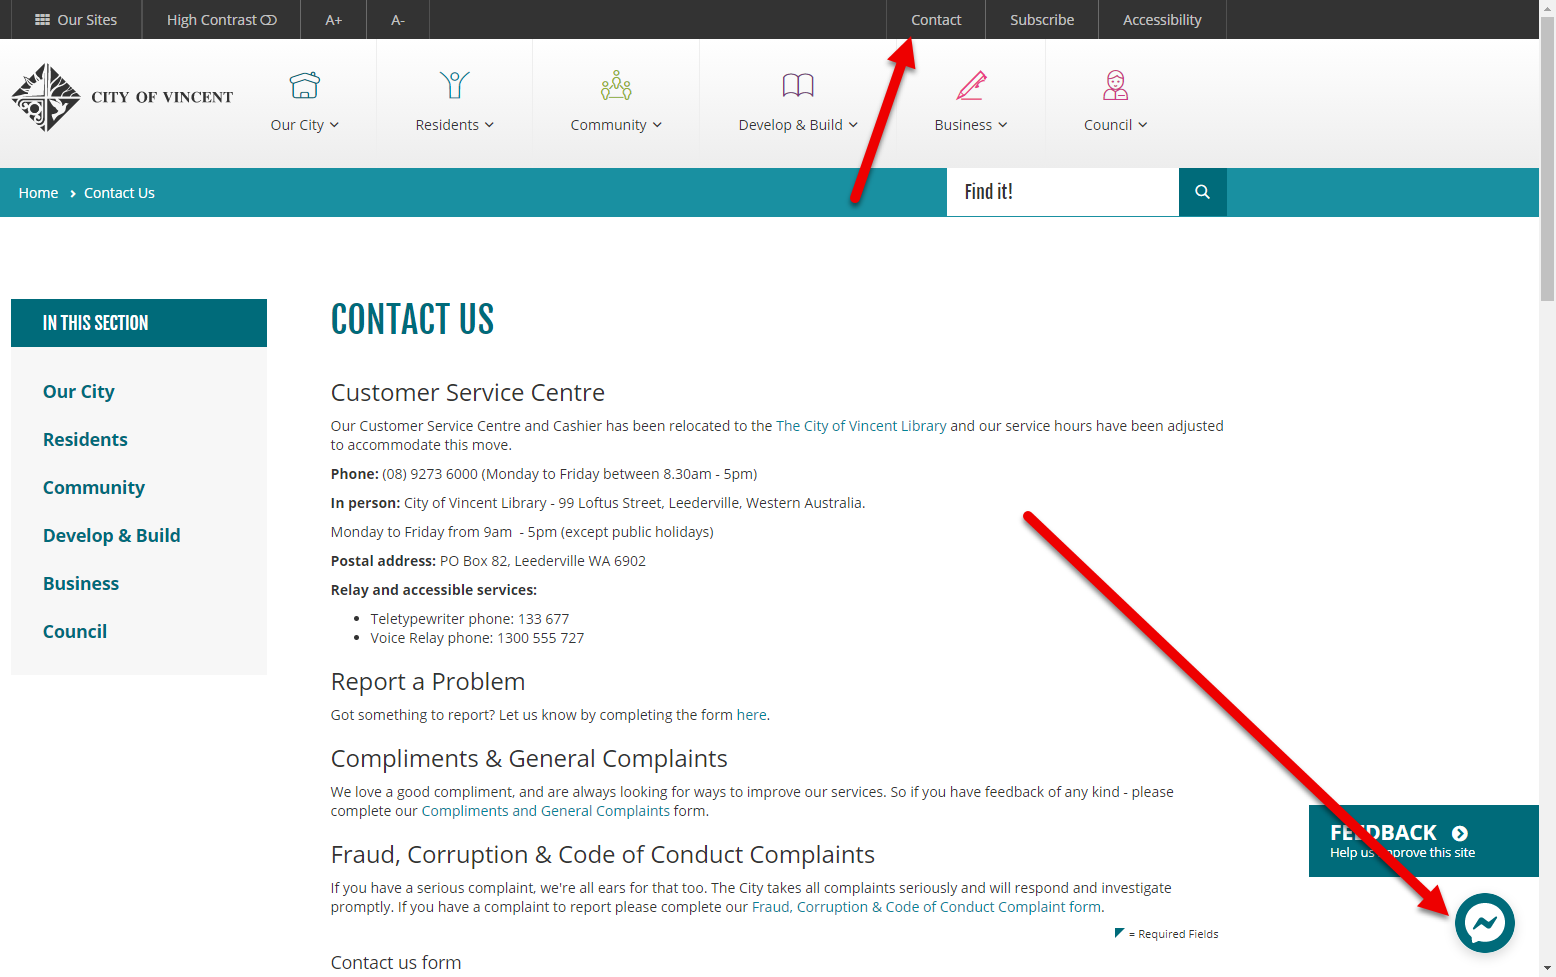 Figure 8: The City of Vincent website has a "Contact" link always findable in the website's header, and it also has a direct human contact mechanism always at the bottom right of the website.